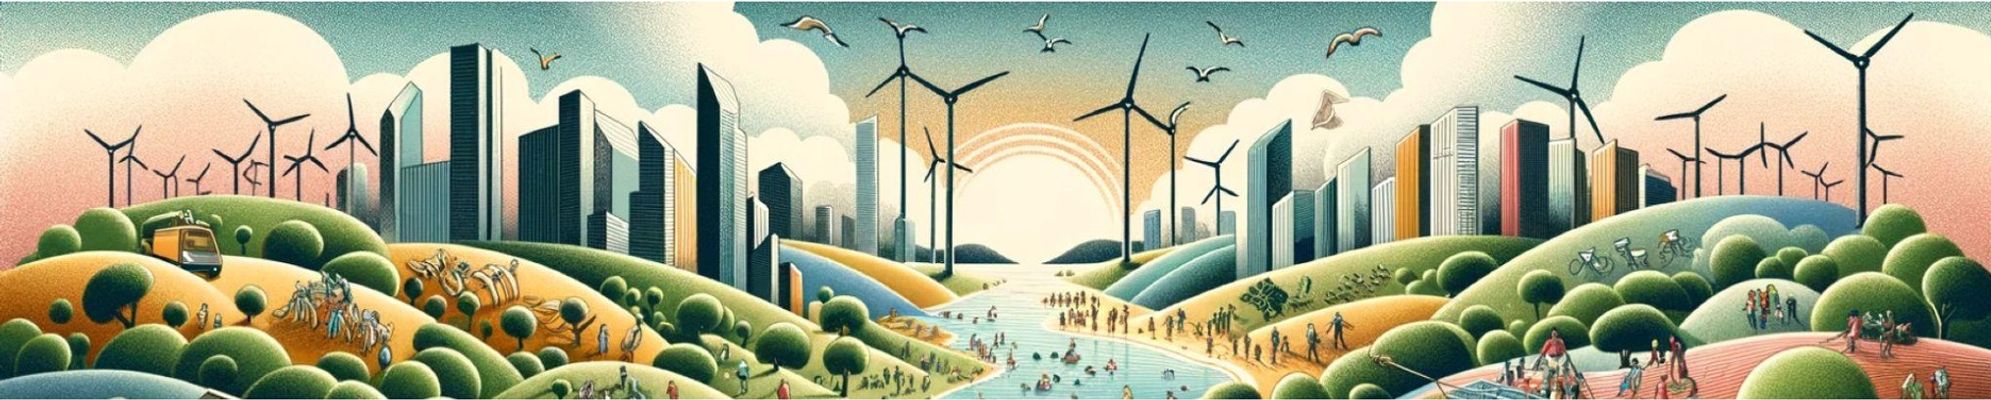 Illustration of wind mills in nature